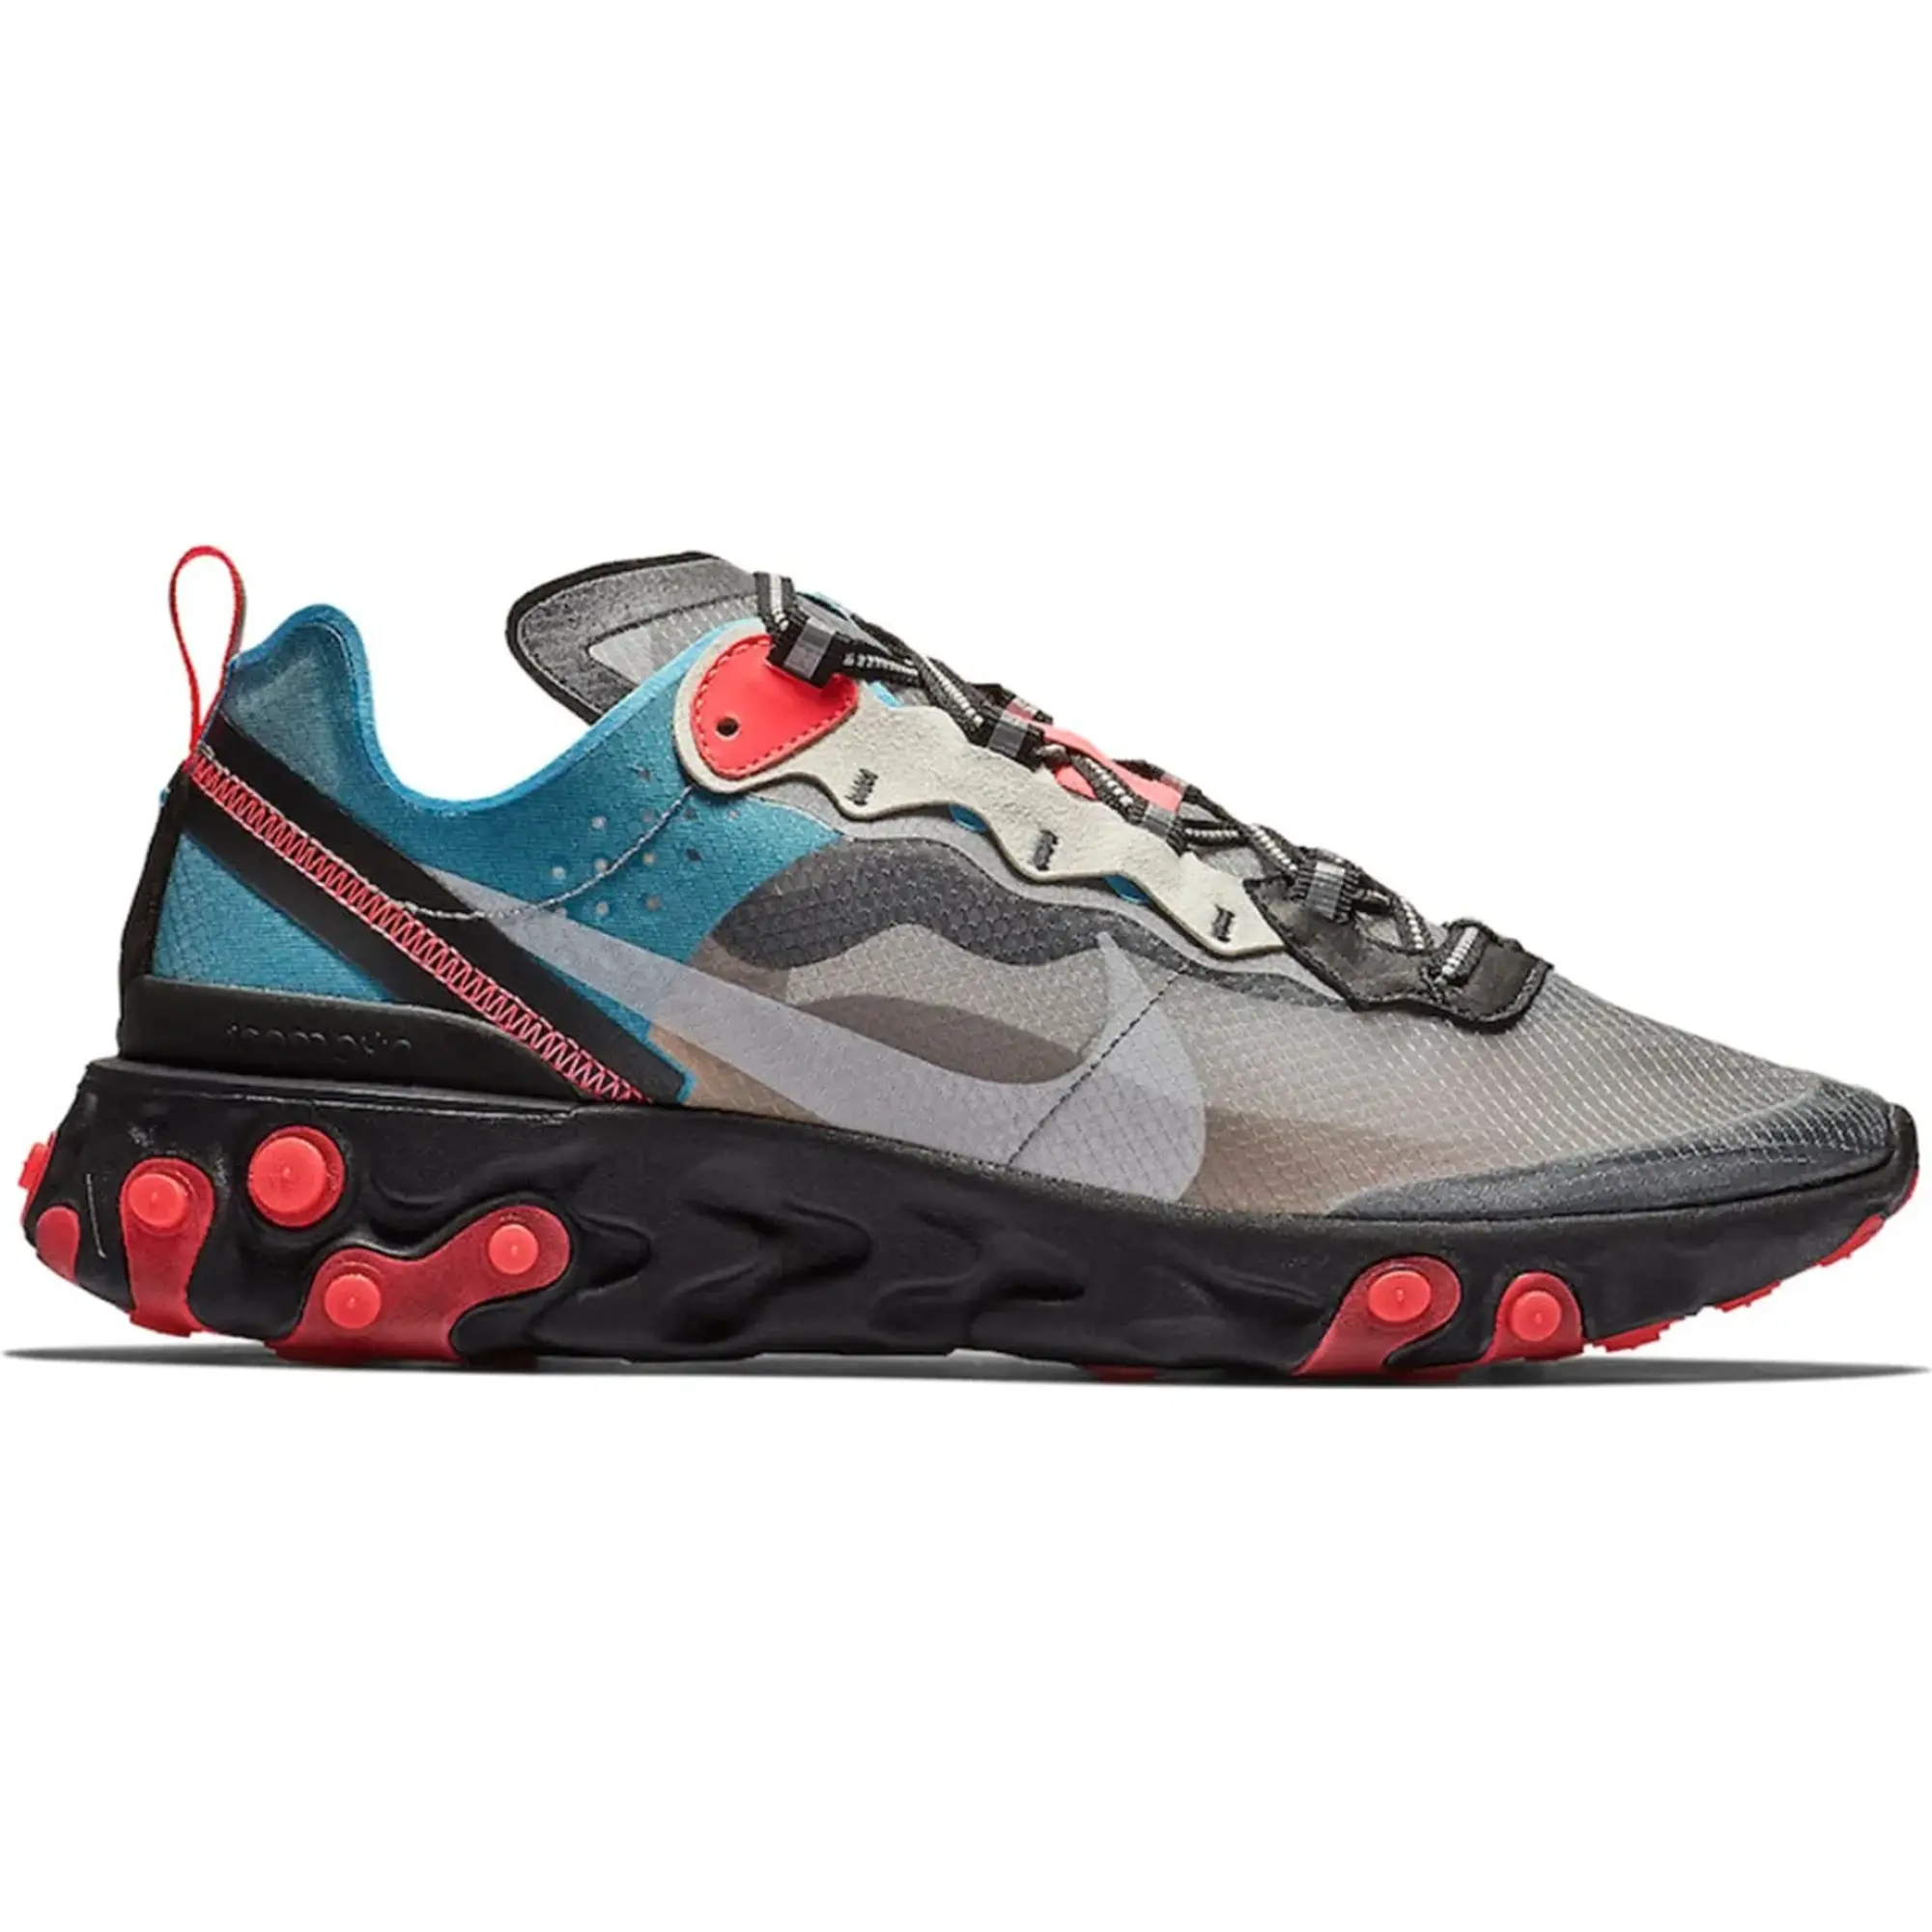 Nike React Element 87 Solar Red